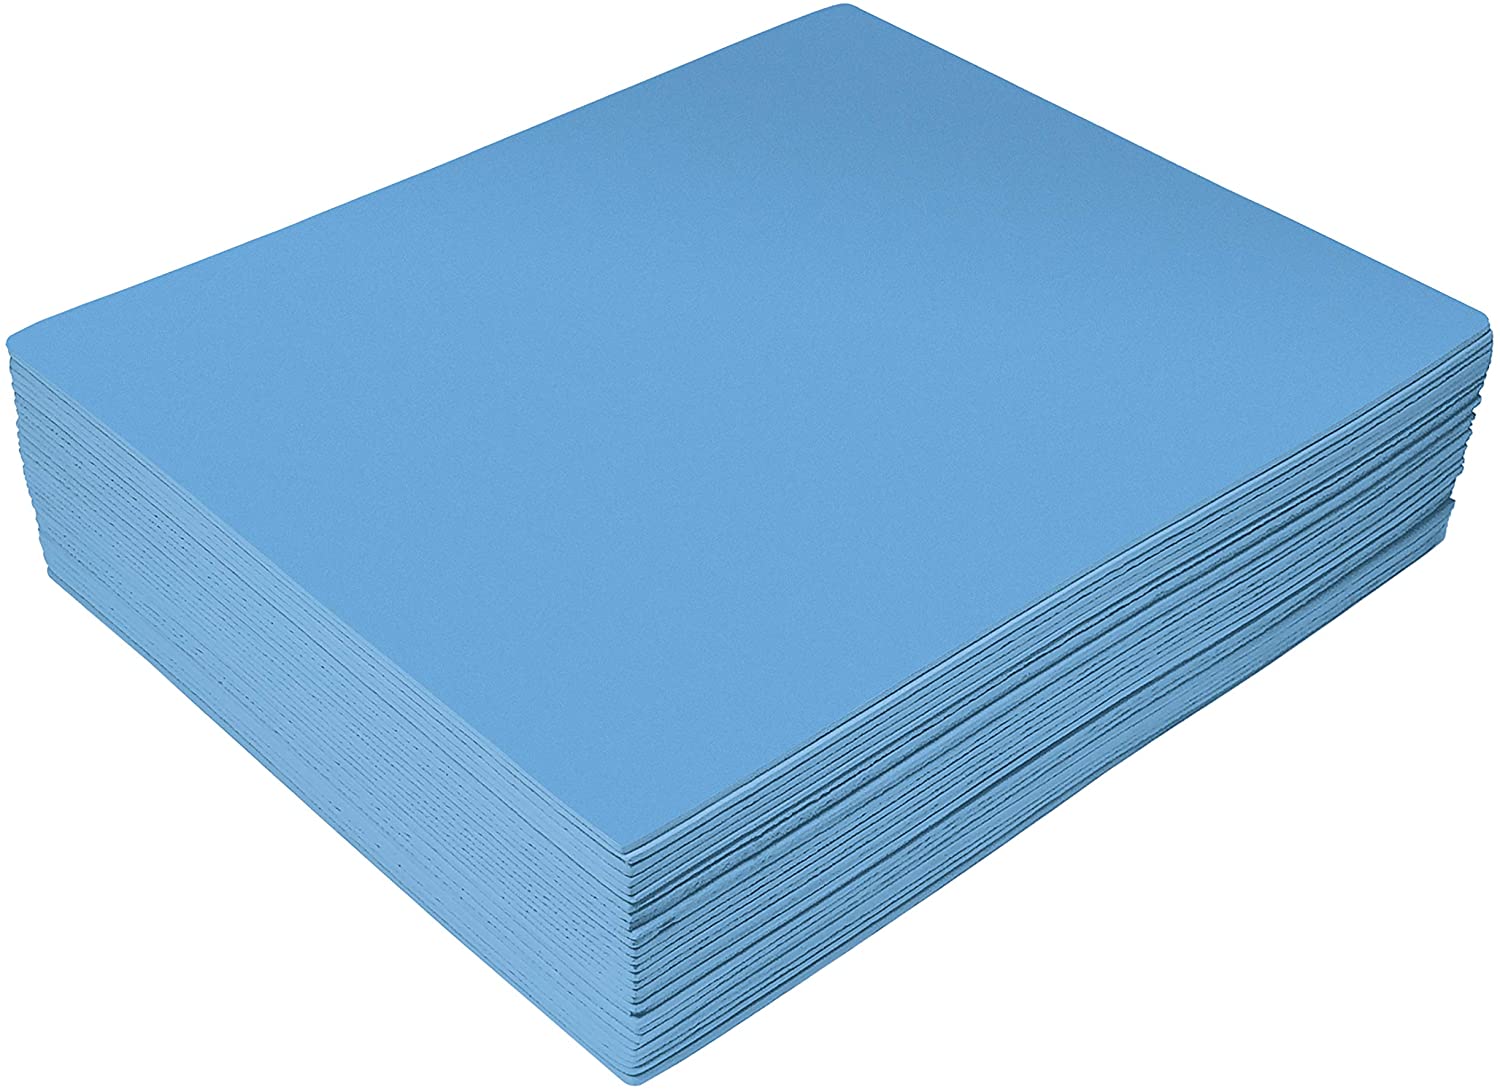 100 Pack Eva Foam Sheets 5.5 x 8.5 inch Assorted Colors (20 Colors) 2mm Thick by Better Office Products for Arts and Crafts 100 Sheets